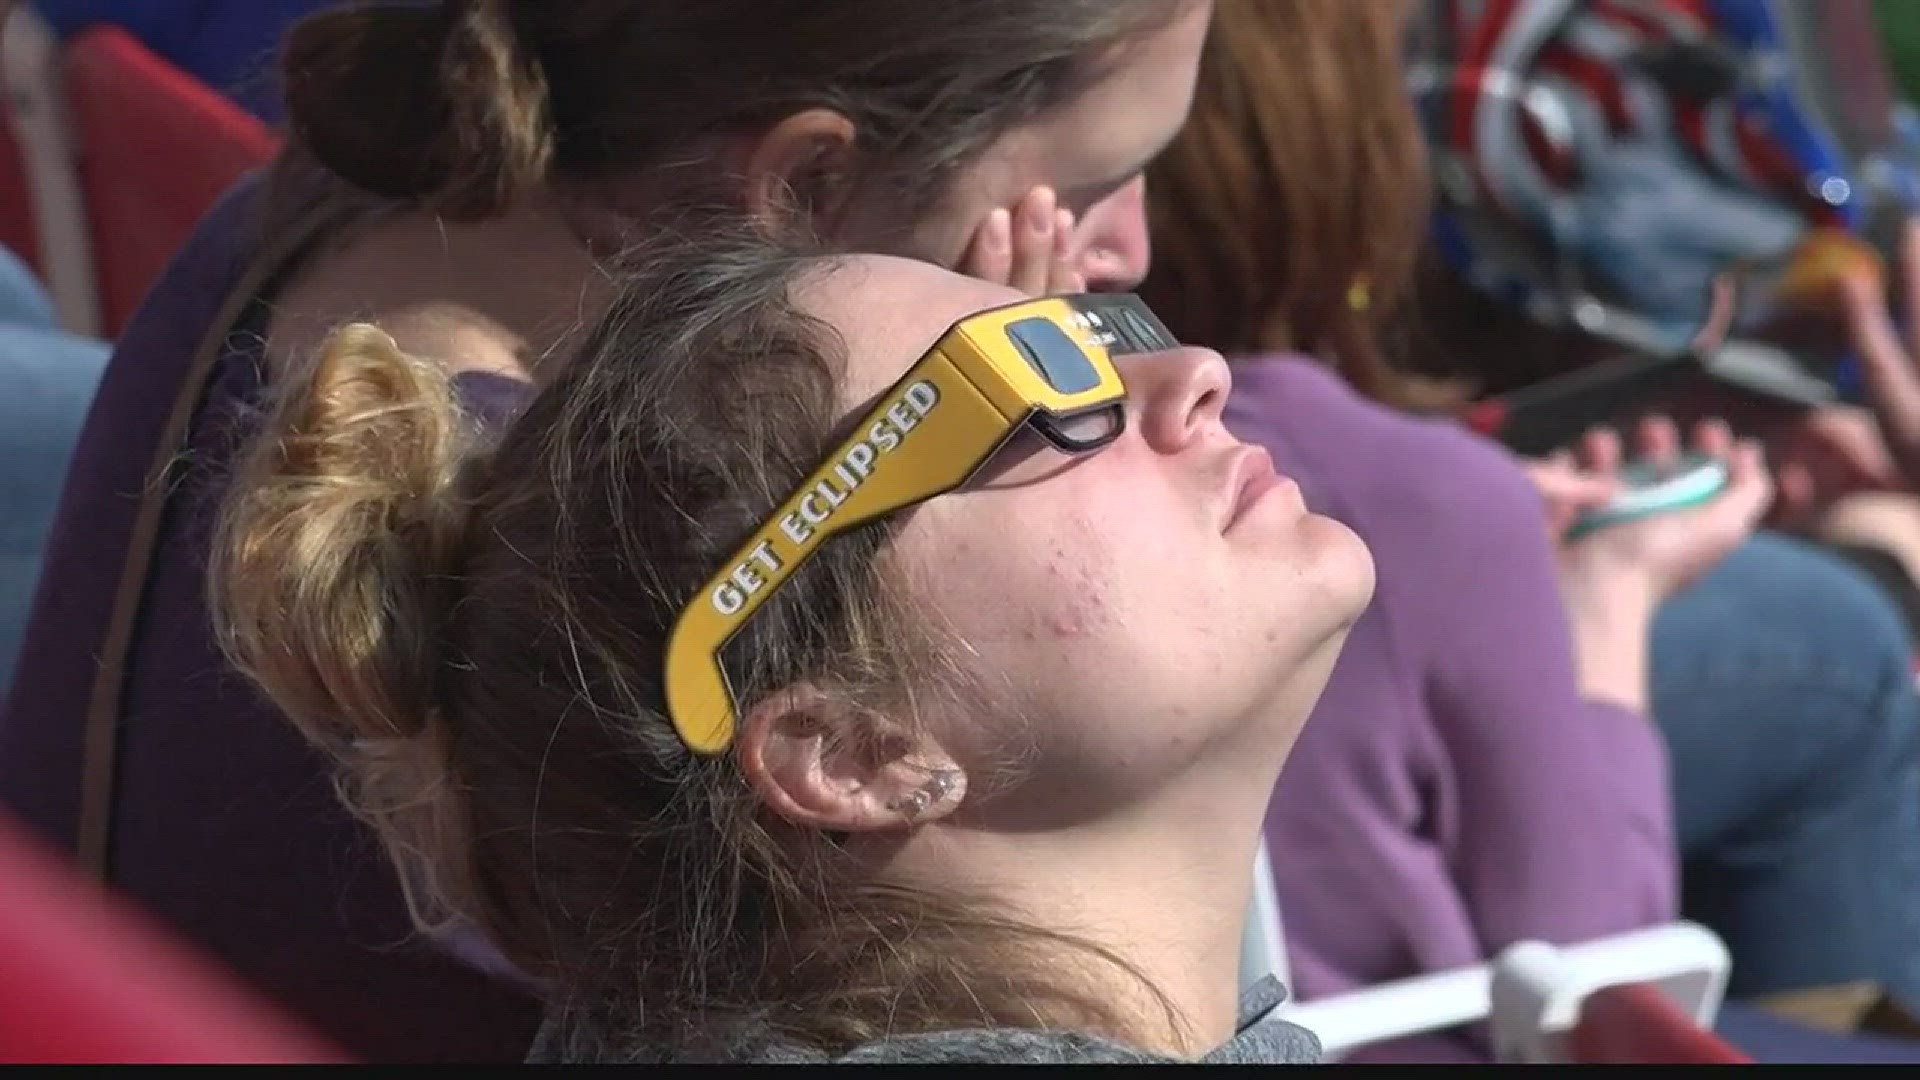 During past eclipses, people who looked at the sun without proper eye wear experienced lifelong eye damage. Some viewers of Monday's eclipse said they are worried about vision loss too and asked how you would know if the eclipse damaged your eyes.